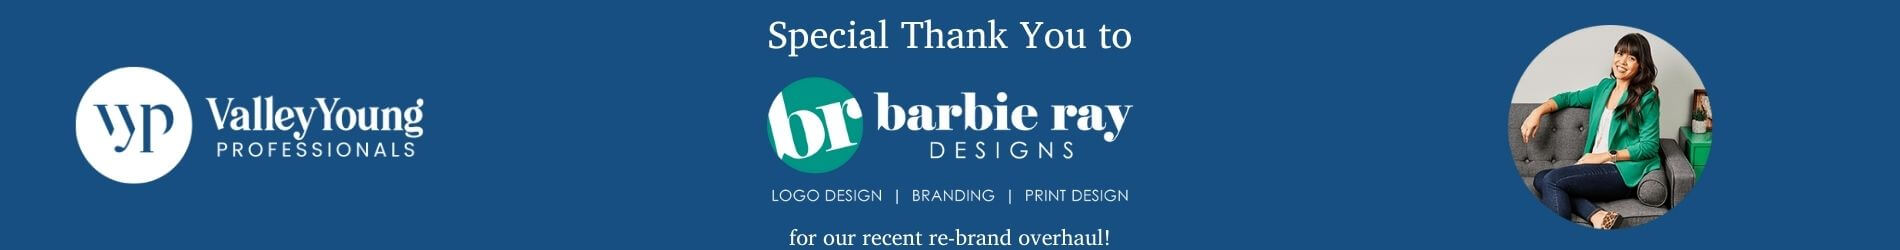 thank you barbie ray designs graphic